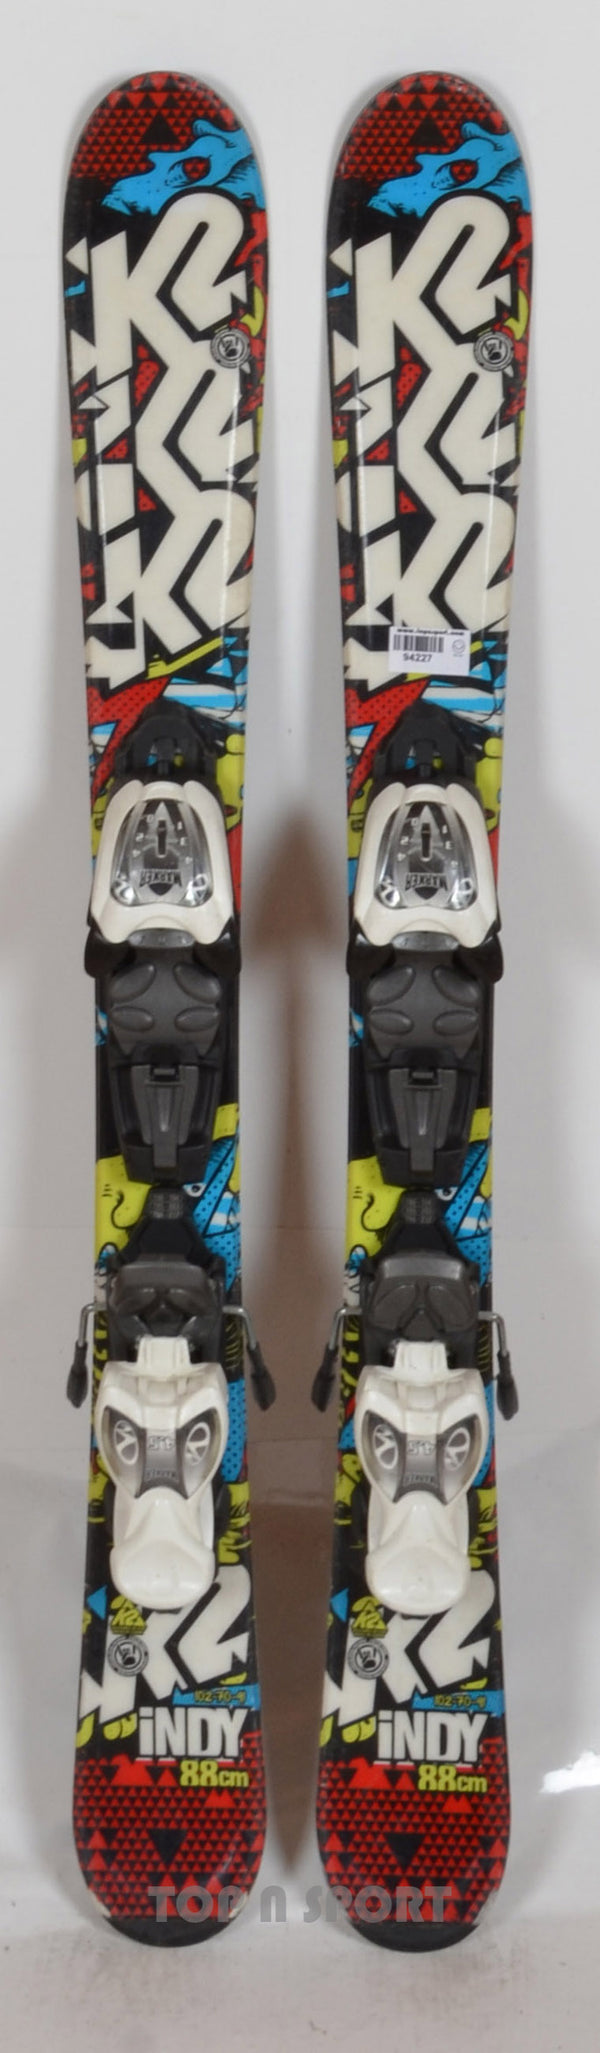 K2 INDY red - skis d'occasion Junior